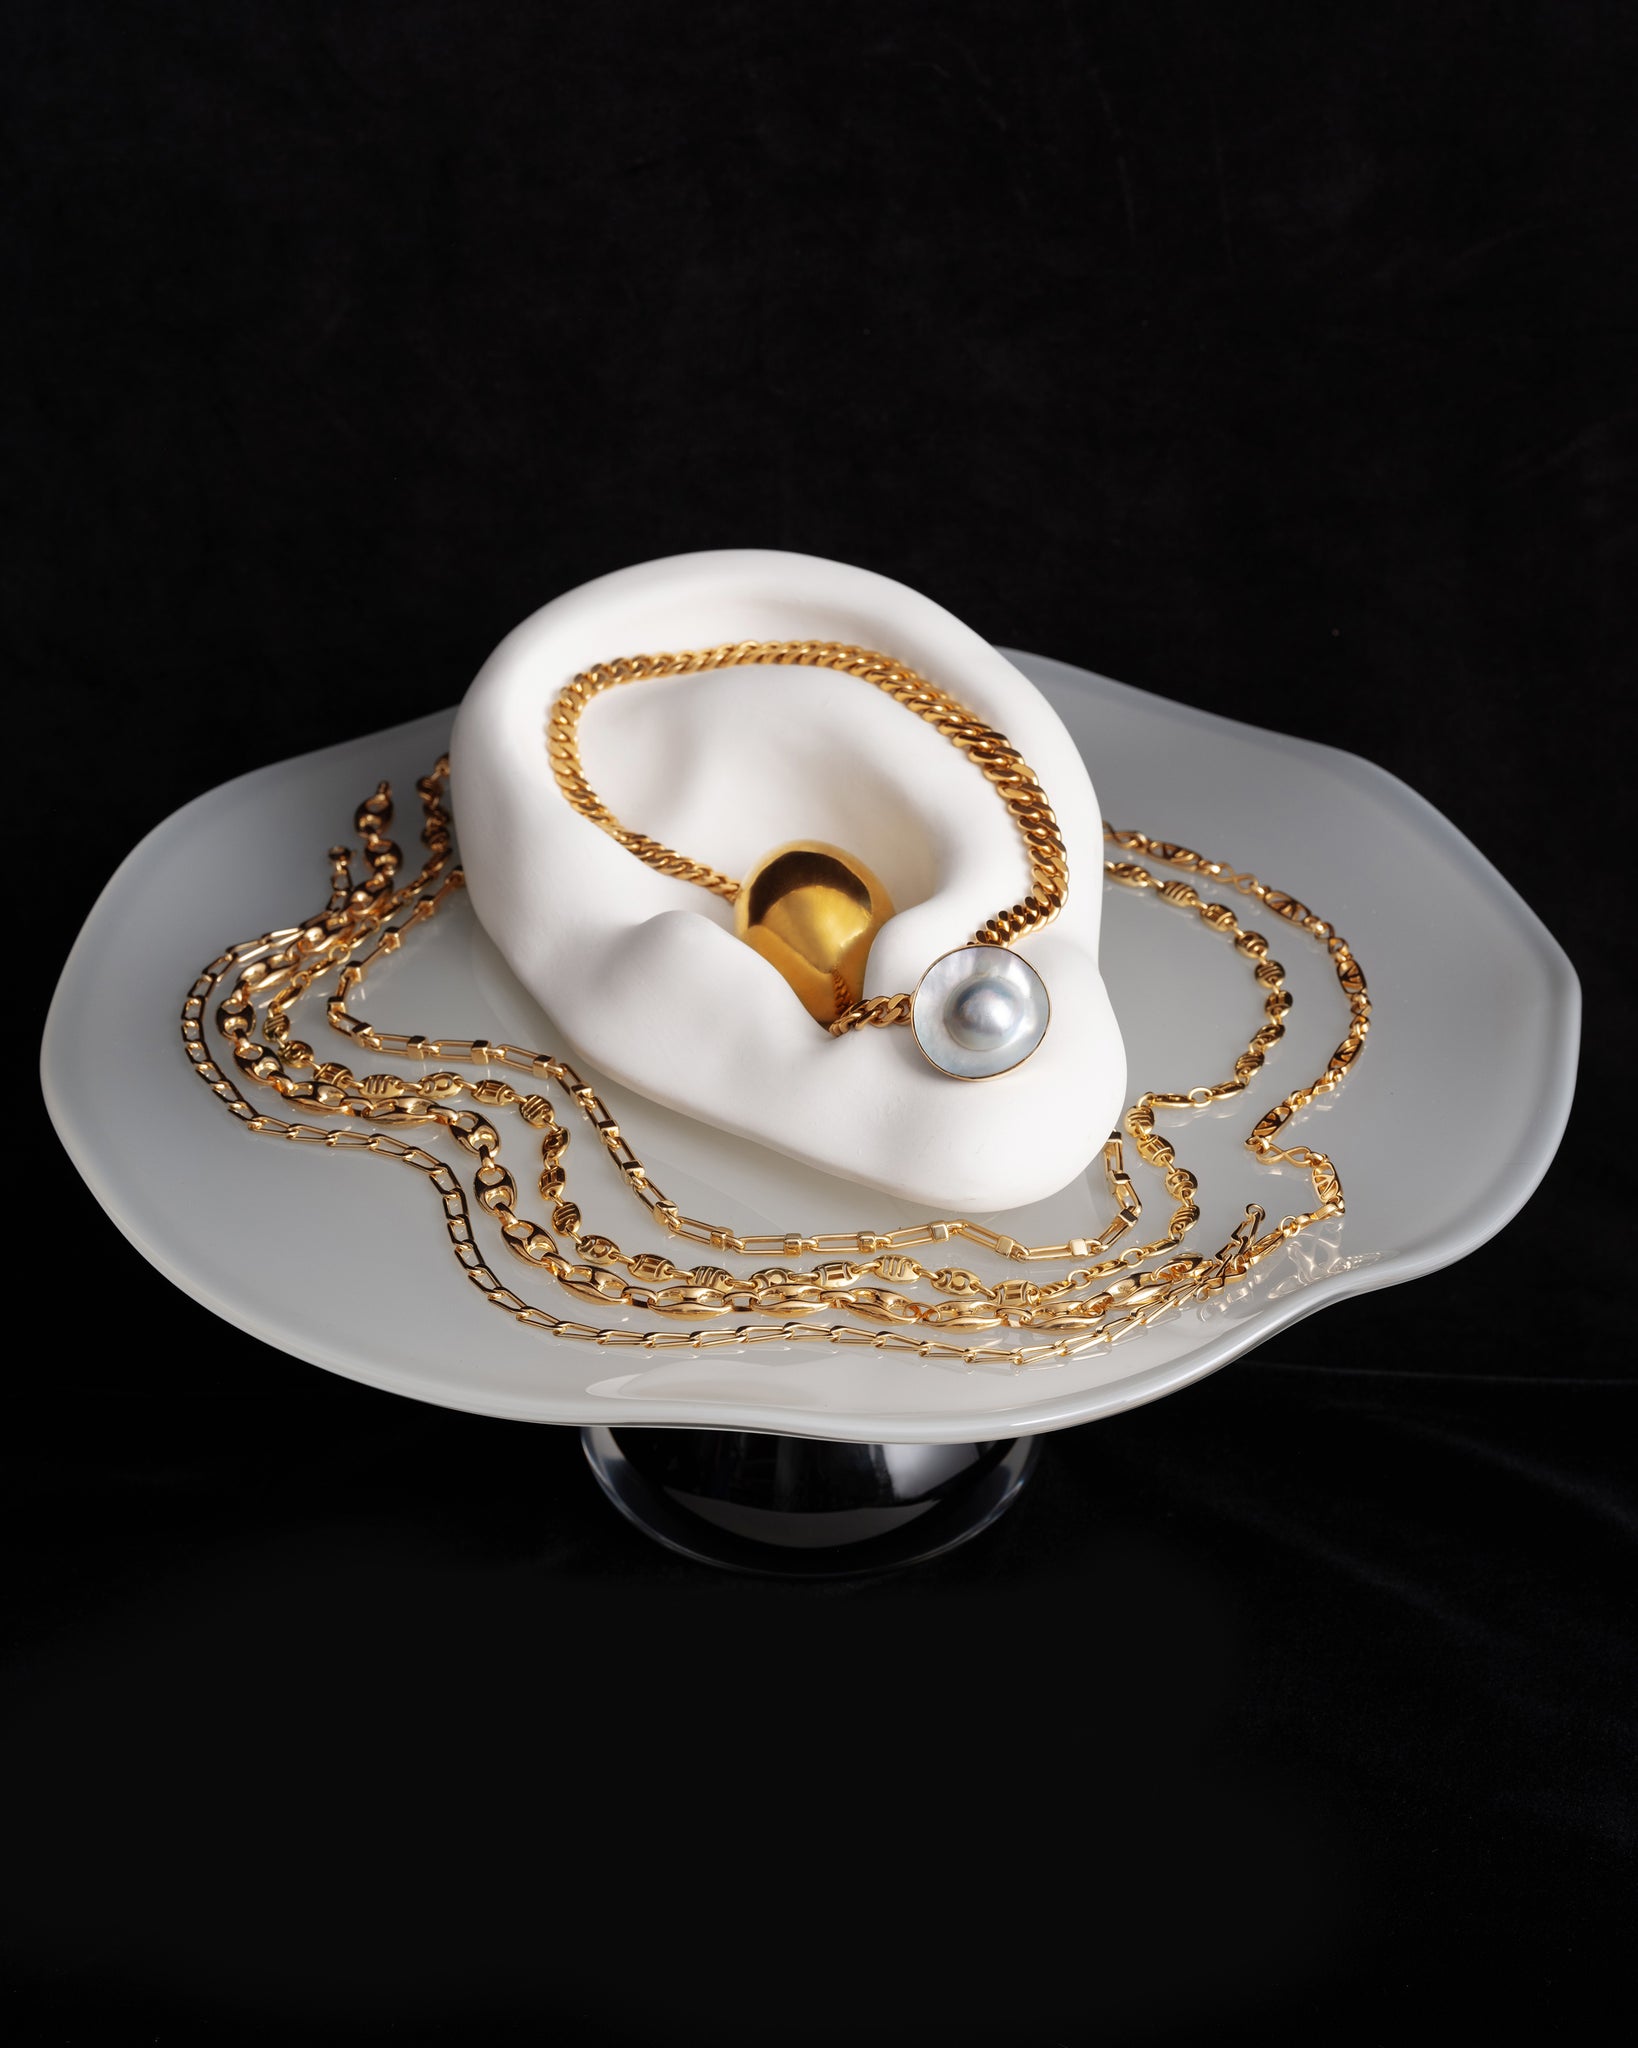 Editorial image of various gold chains and pearl earrings on the Bon Bon Cake Stand, on a black background.